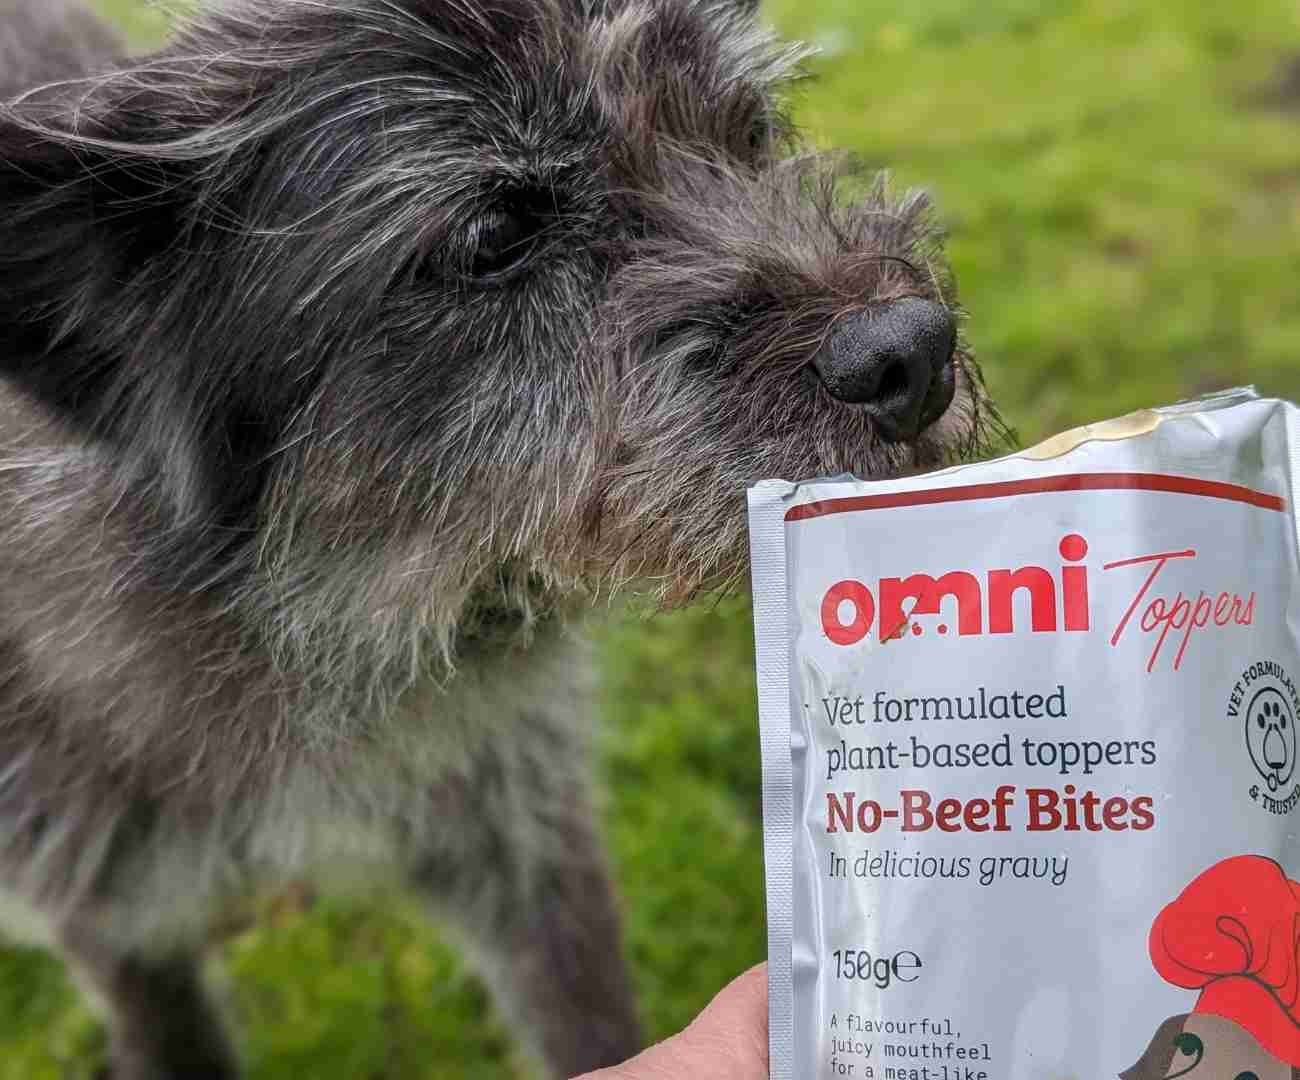 Image of Sundhi, a black dog with grey streaks in her fur, sniffing a silver coloured pouch which contains Omni Toppers vegan wet dog food. The pouch shows an image of a brown dog with a red chef's hat on and a wooden spoon in its mouth, and red and black lettering describing the contents - Omni Toppers no beef bites vegan wet dog food